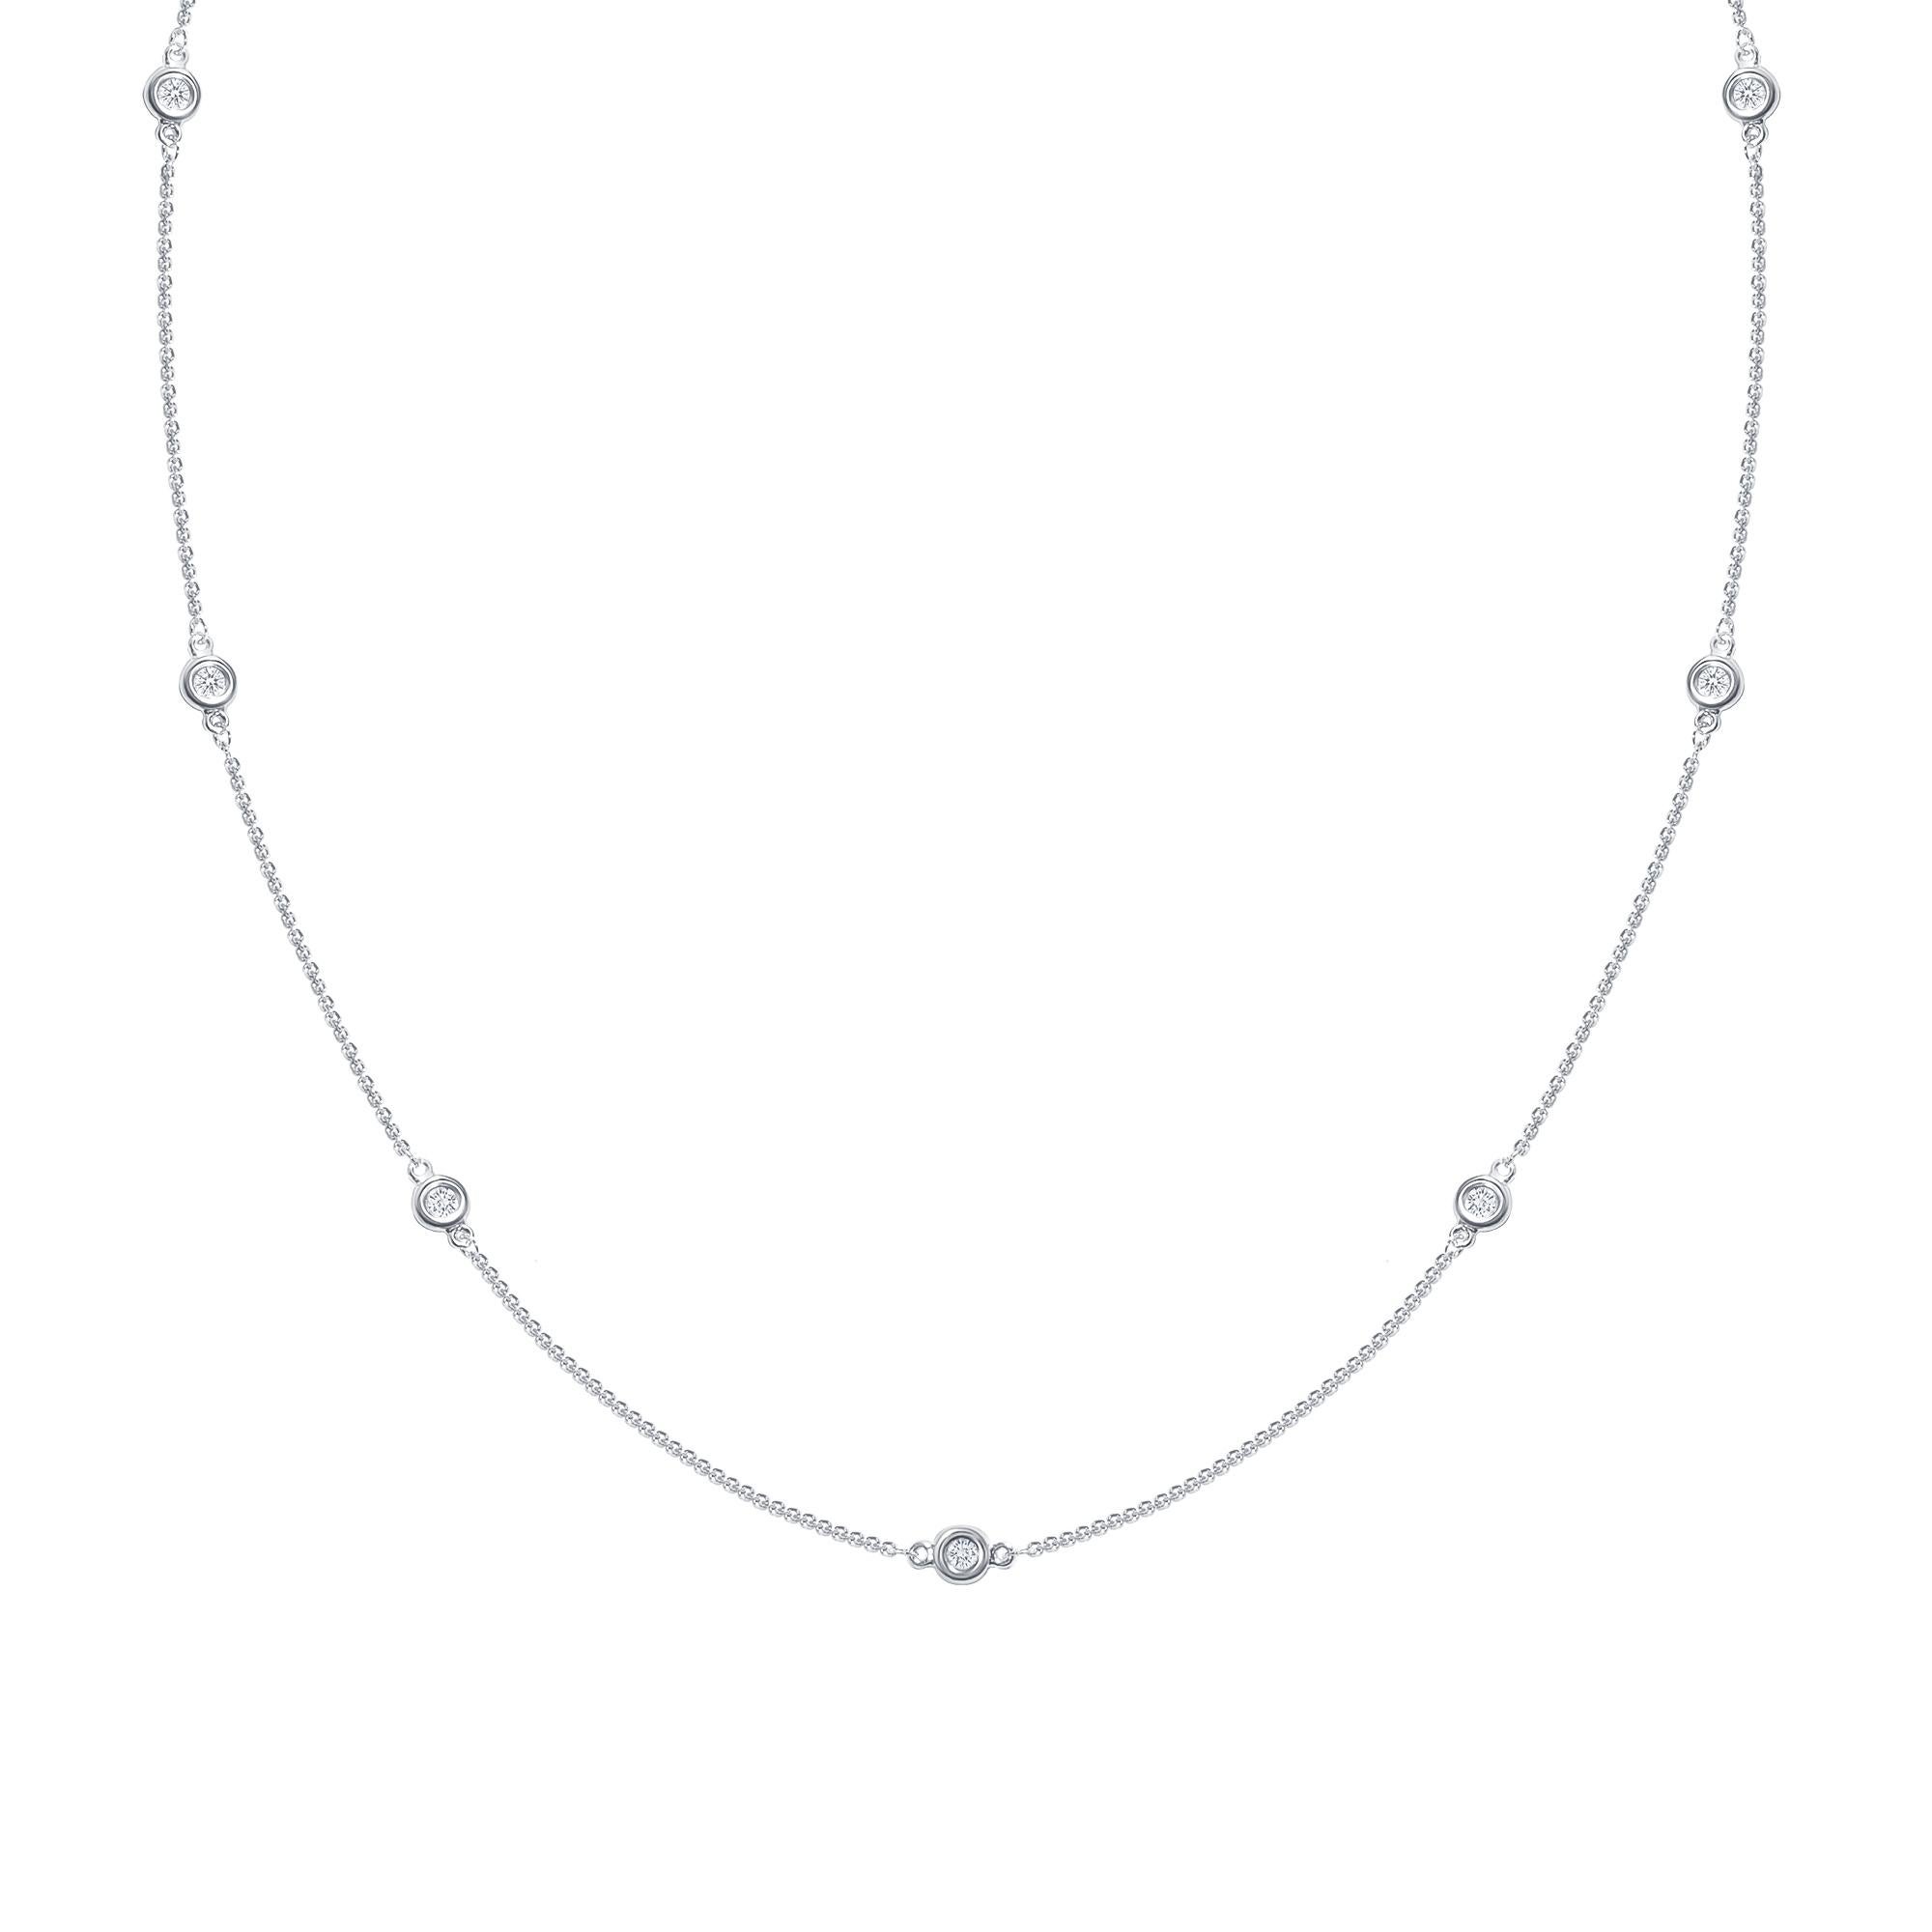 Eight elegant round diamonds set in a bezel setting along a 14k gold chain necklace.

Gold: 14K Gold
Number of Diamonds: Eight
Gold Color: White Gold
Carat: 1.5 Carat
Necklace Length: 22 Inches
Diamond Clarity: VS
Diamond Color: F
Chain Type: